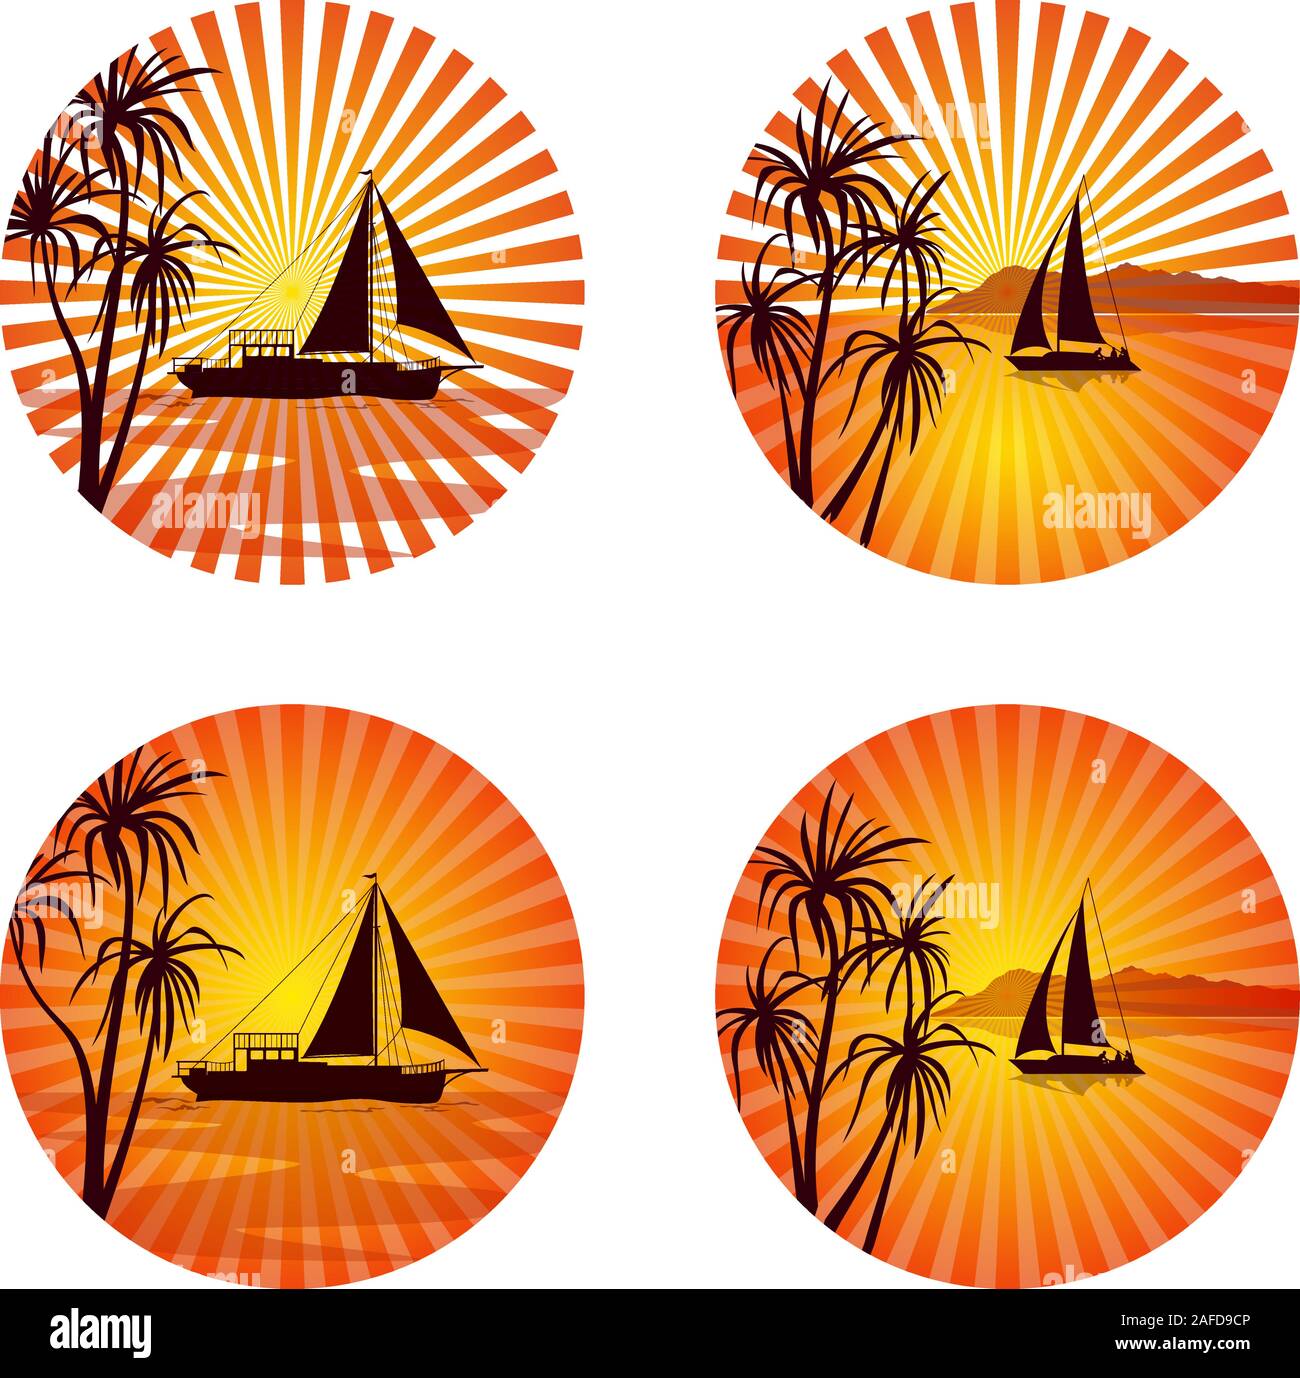 Icons, Logo or Labels, Tropical Landscape with Ships and Exotic Palms Trees Silhouettes on Circle Background with Orange and Yellow Sun Beams. Vector Stock Vector